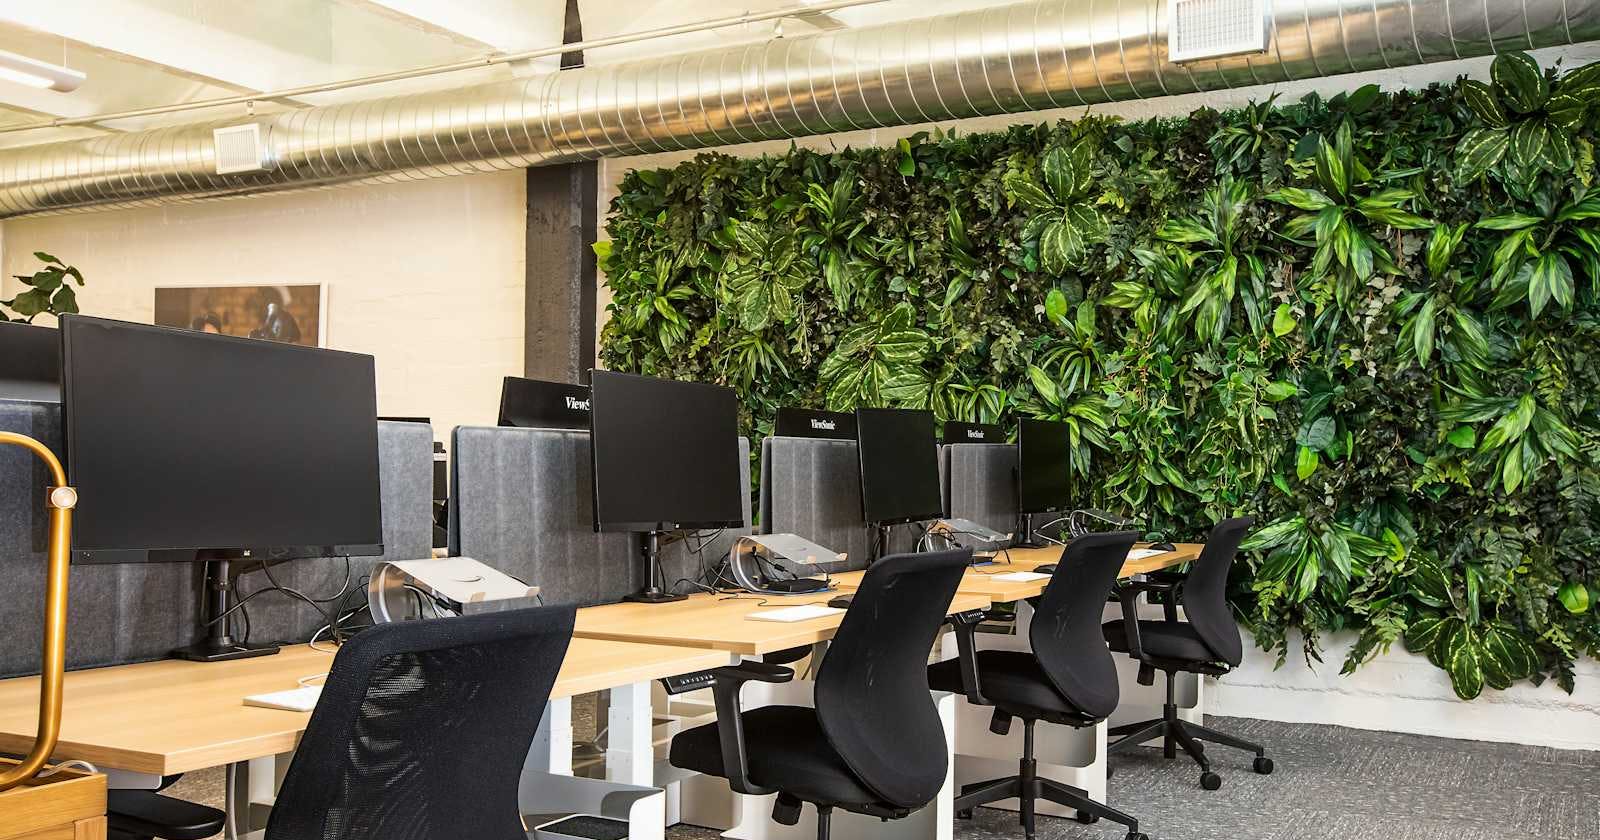 Ways to Make Your Business Greener